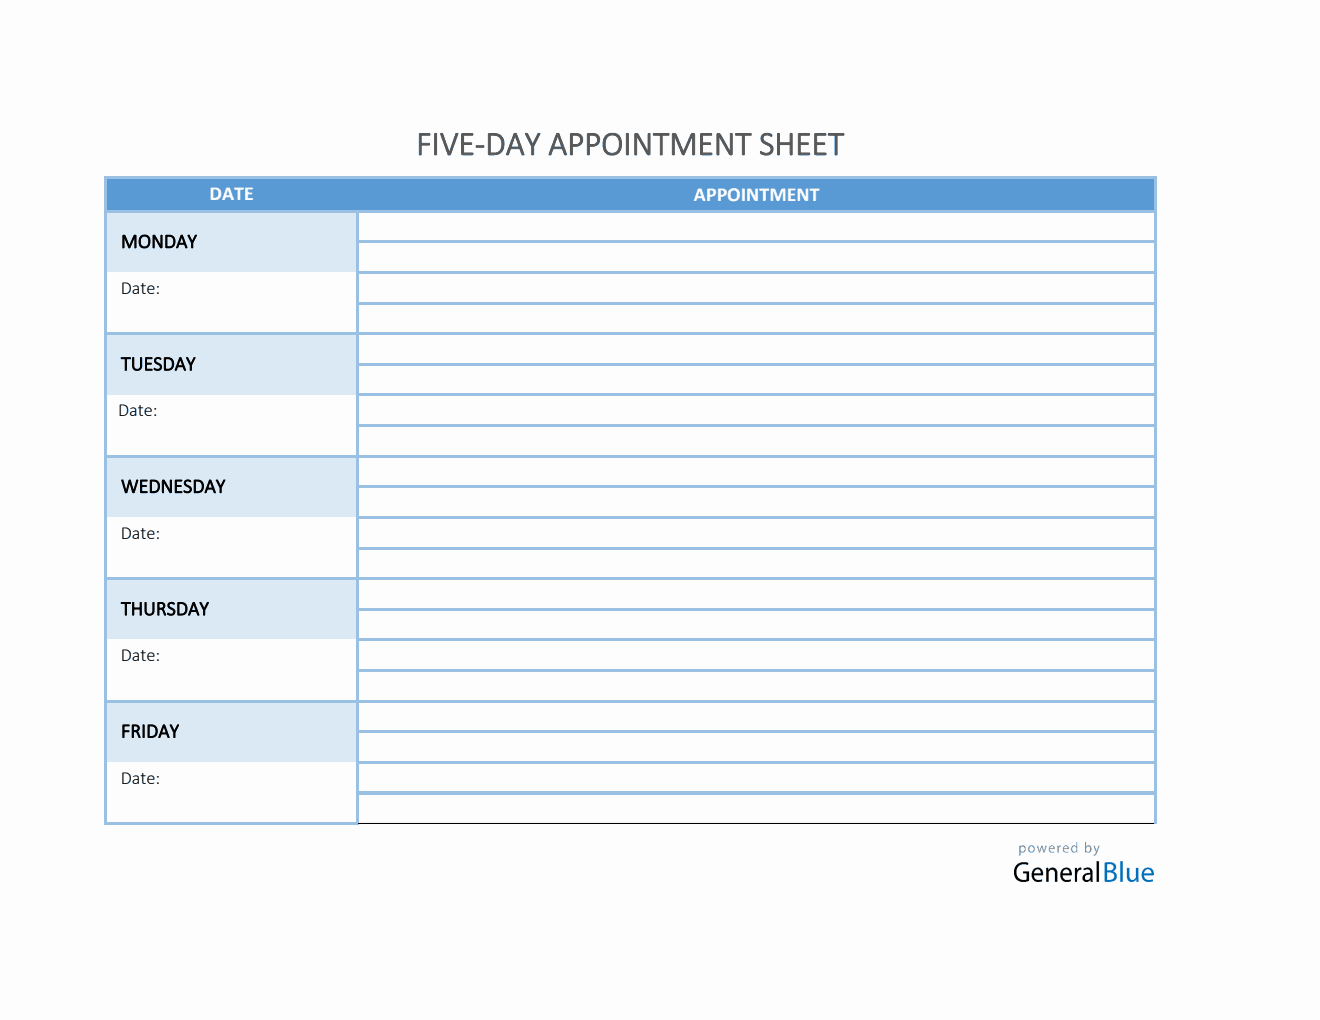 Five-Day Appointment Sheet Template in Excel (Basic)